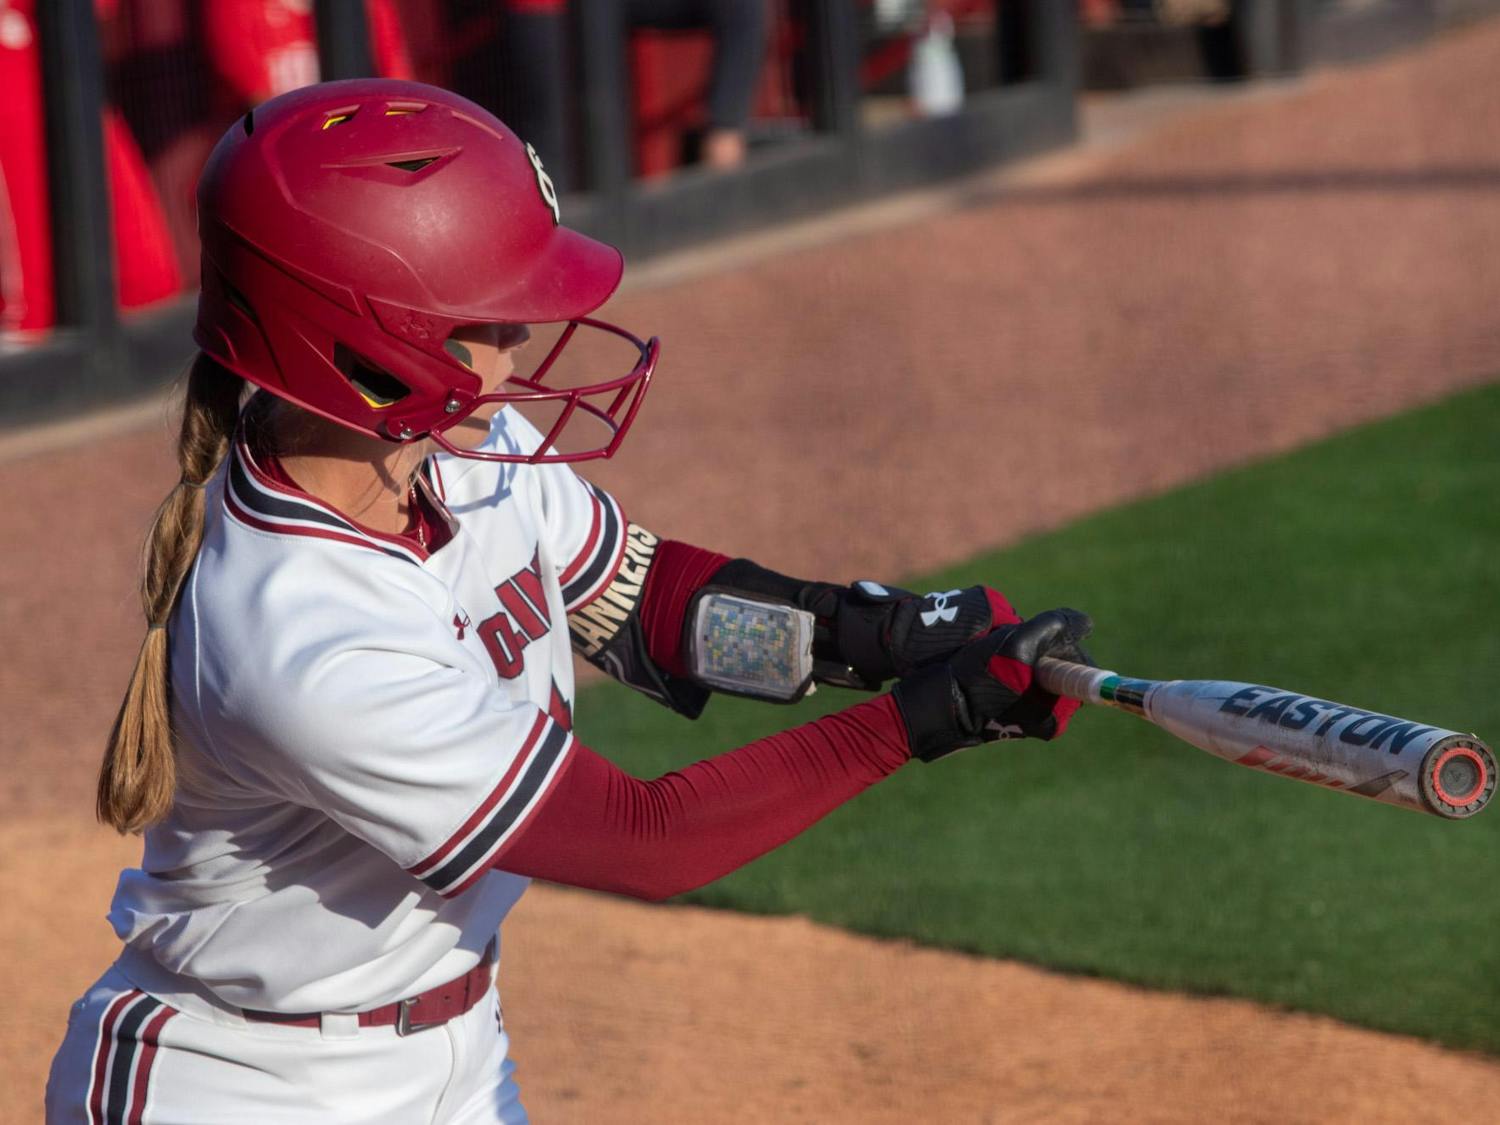 &nbsp;Junior infielder Brooke Blankenship attempts a bunt down the third baseline in South Carolina's game against Boston University on March 14, 2024. The Gamecocks beat the Terriers 3-0.